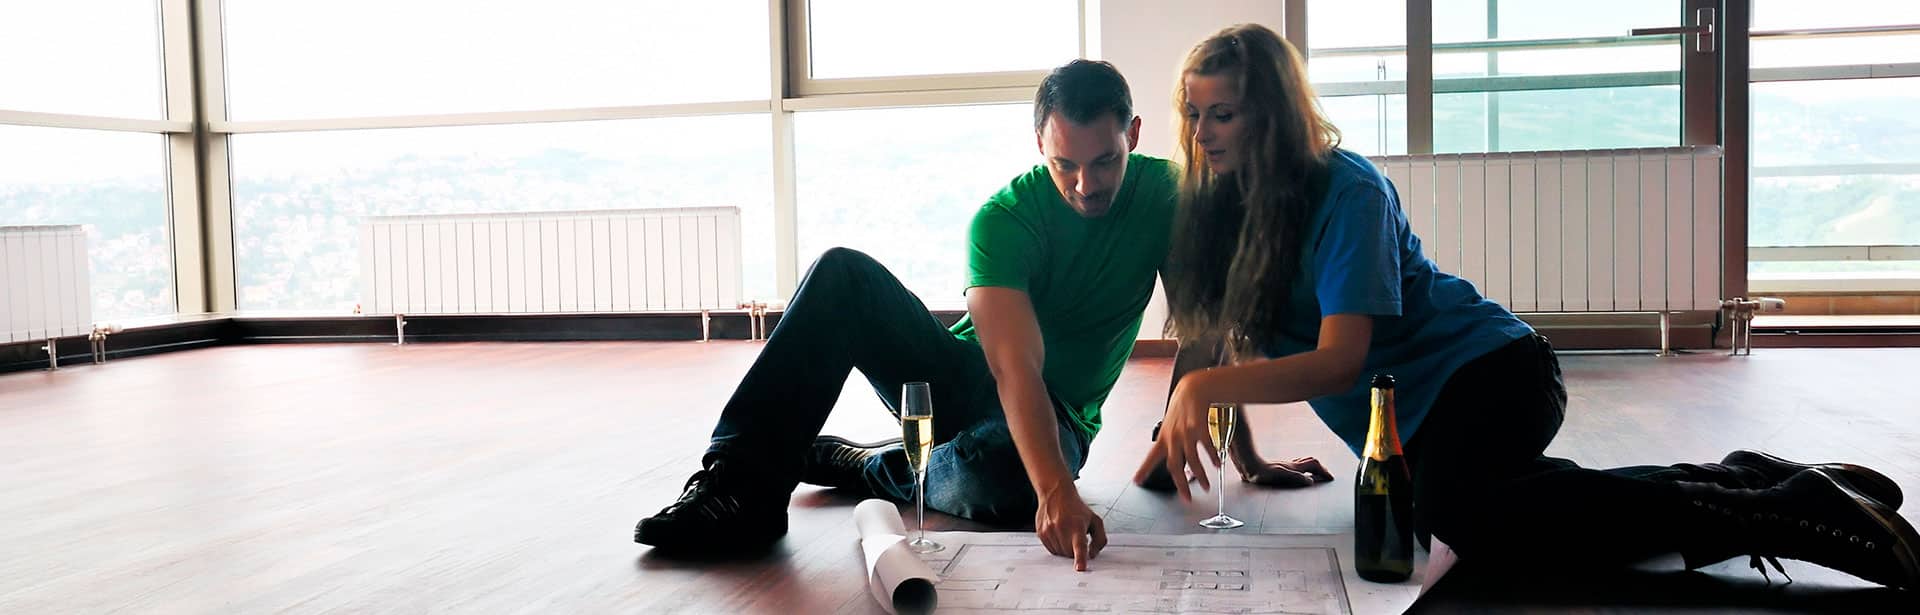 Couple sitting on the floor, looking at a floor plan blueprint.